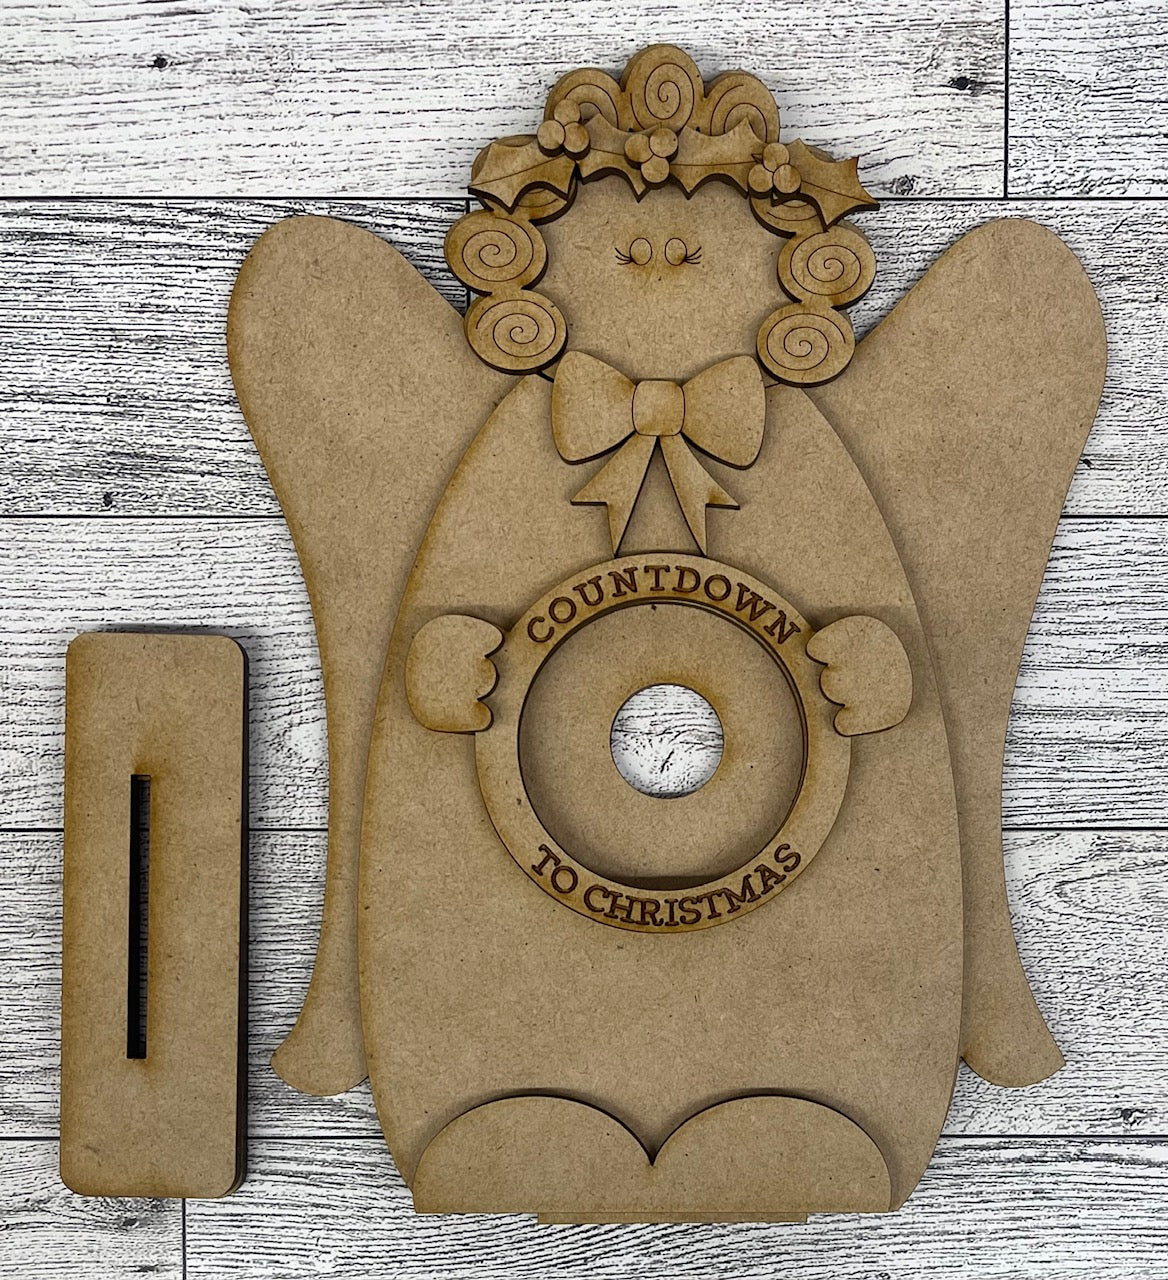 Angel Countdown to Christmas wood cutouts, unpainted ready for you to paint